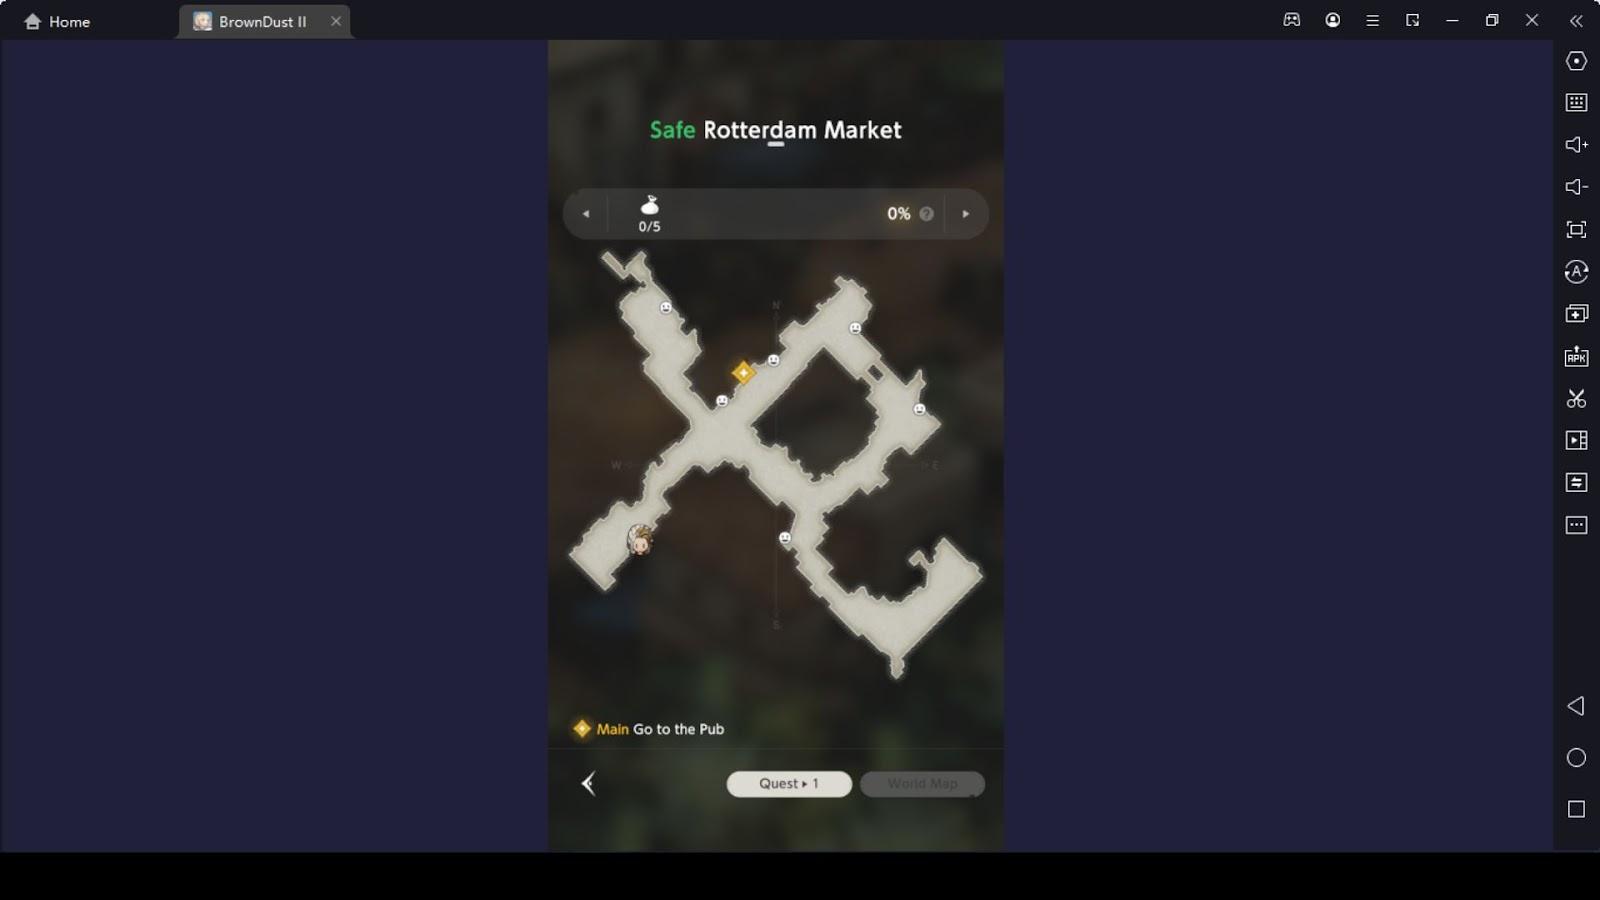 Refer to the Mini Map